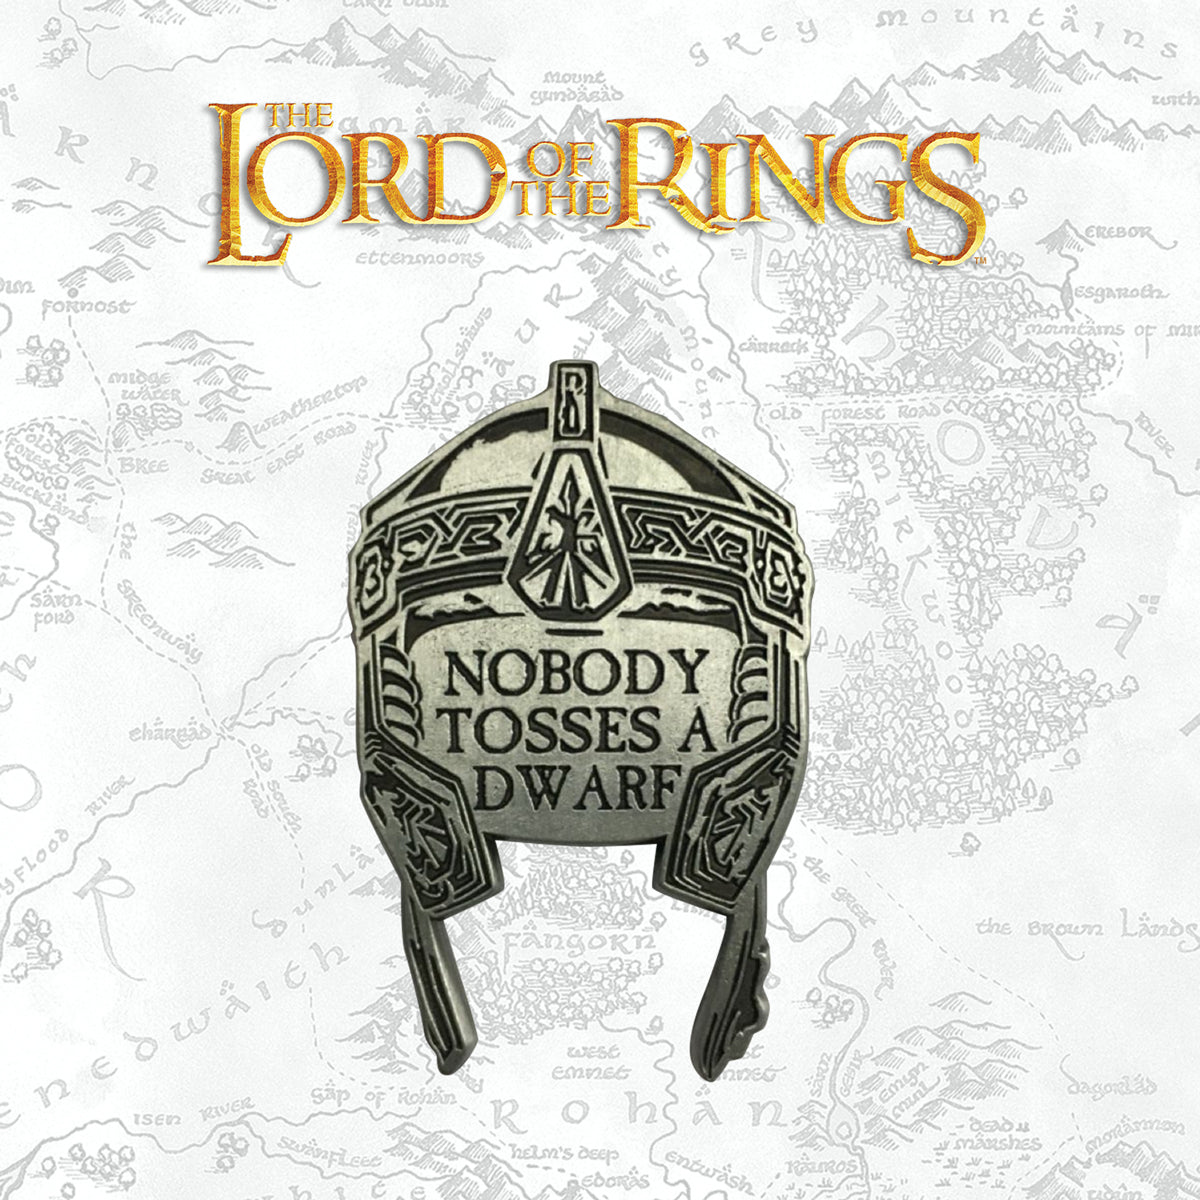 The Lord of the Rings Limited Edition Pin Badge